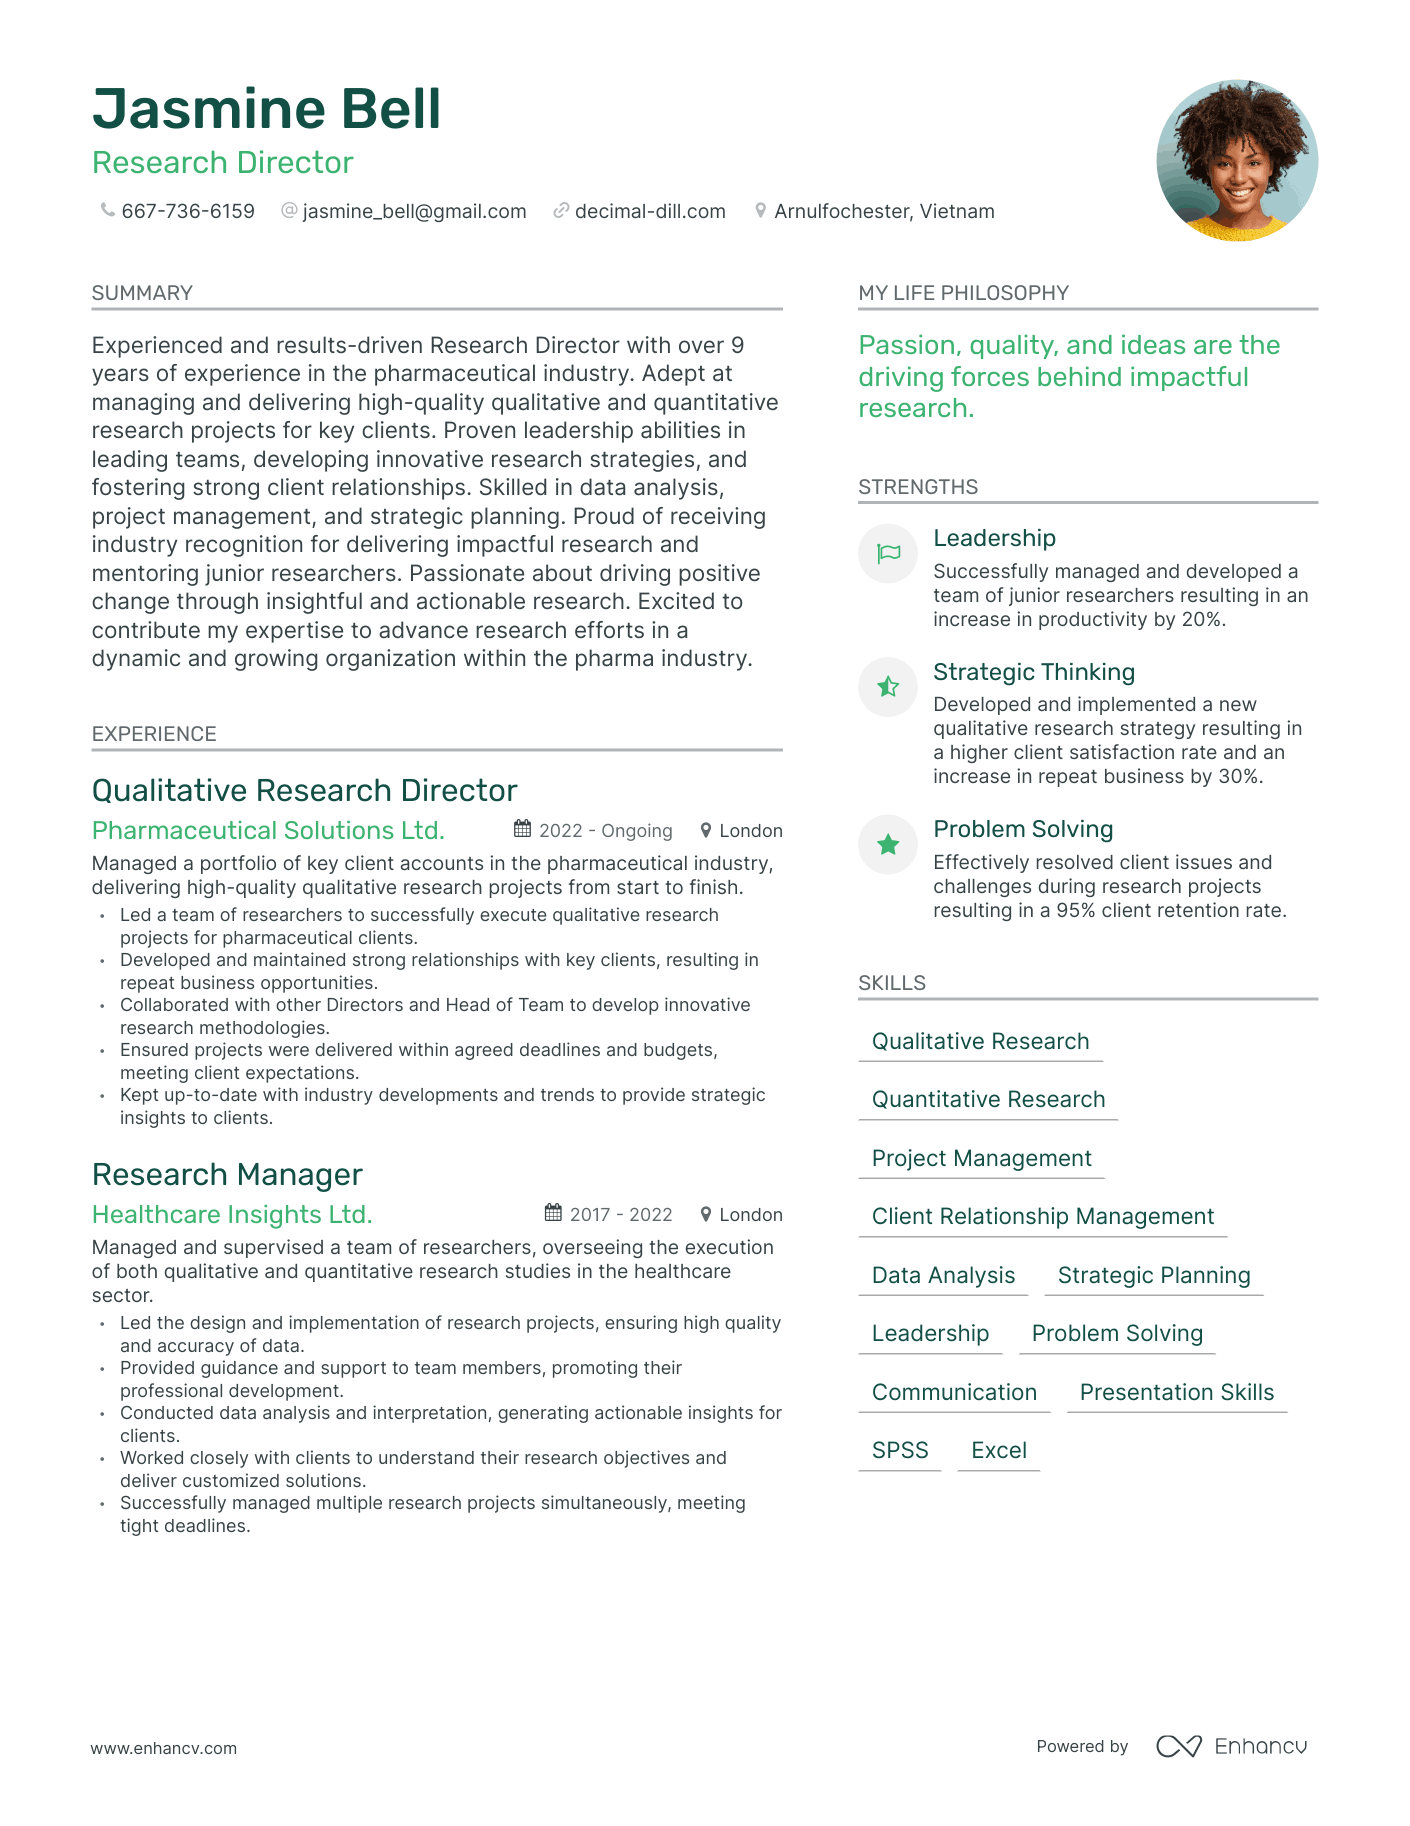 Research Director resume example